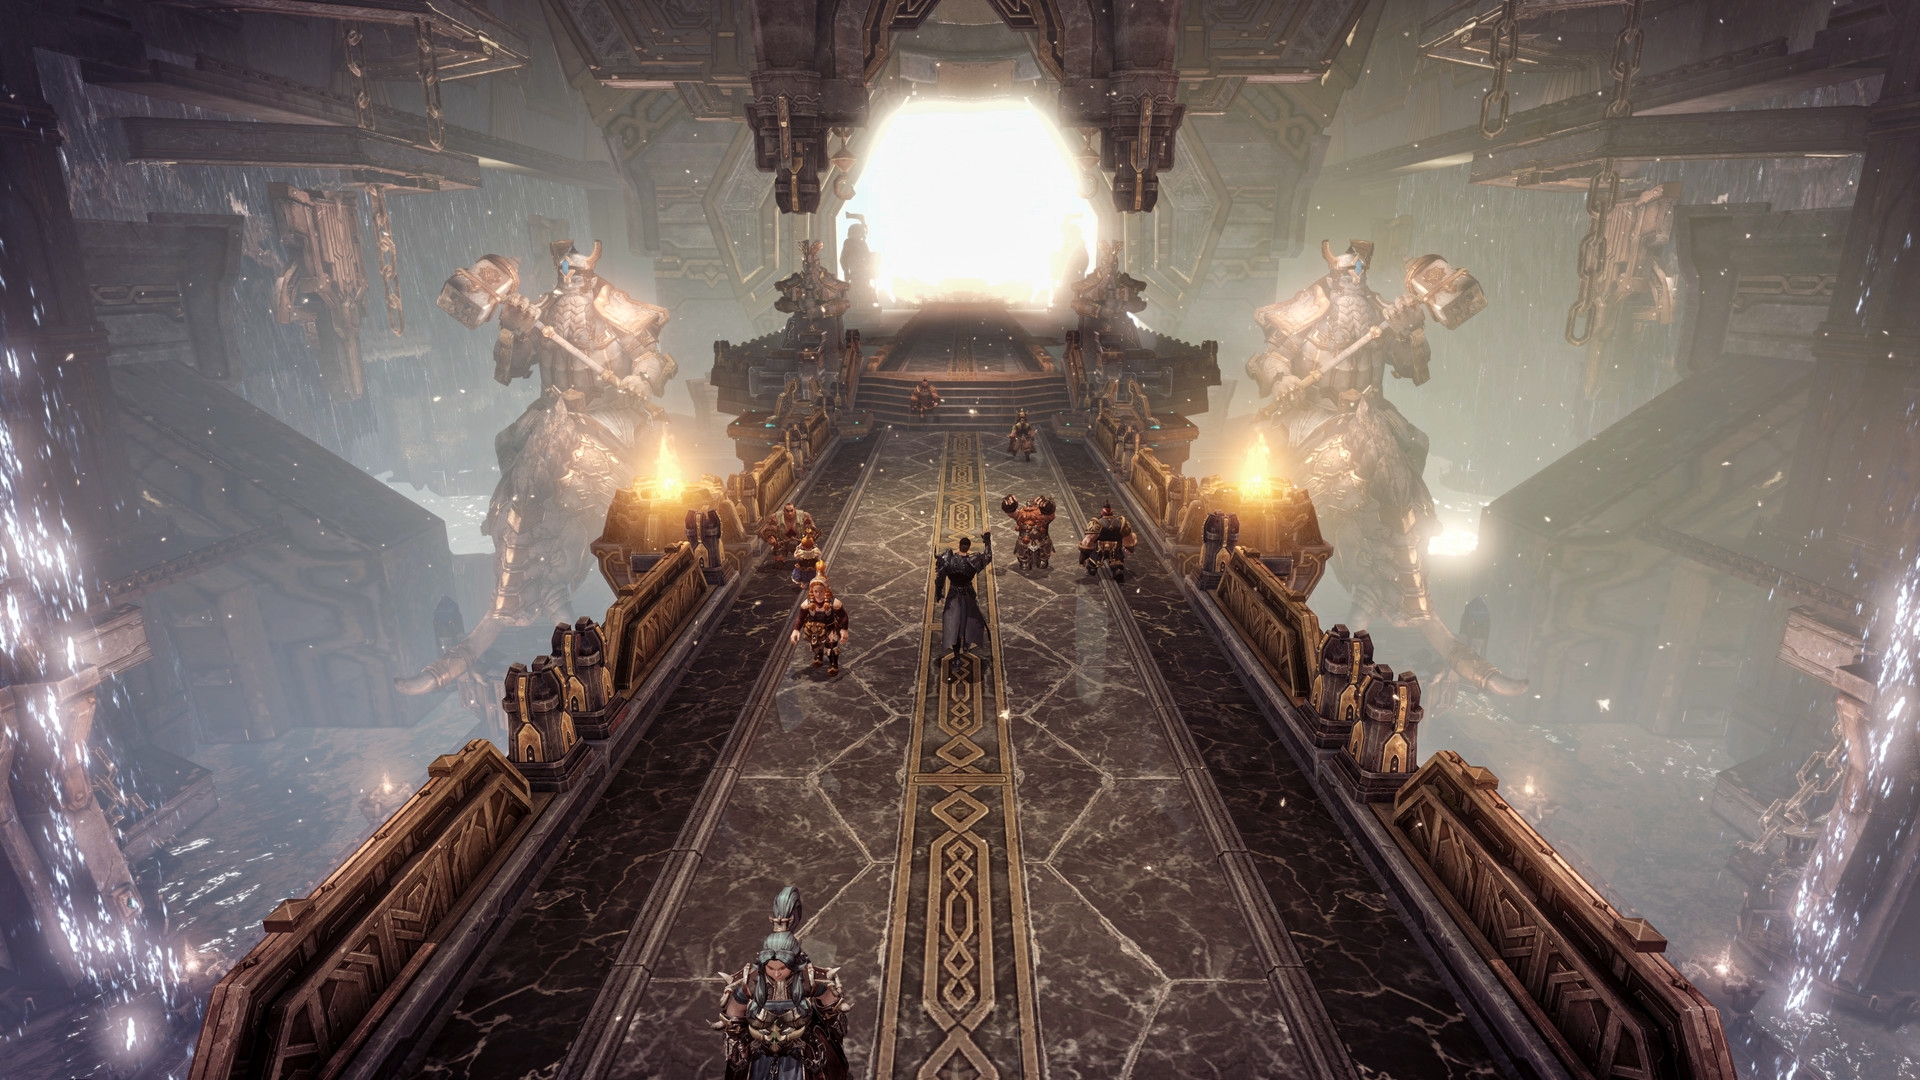 In this article, we are going to go over how to find Knights Oath Lost Ark, so you can obtain the Seraphic Oath Set within the game.